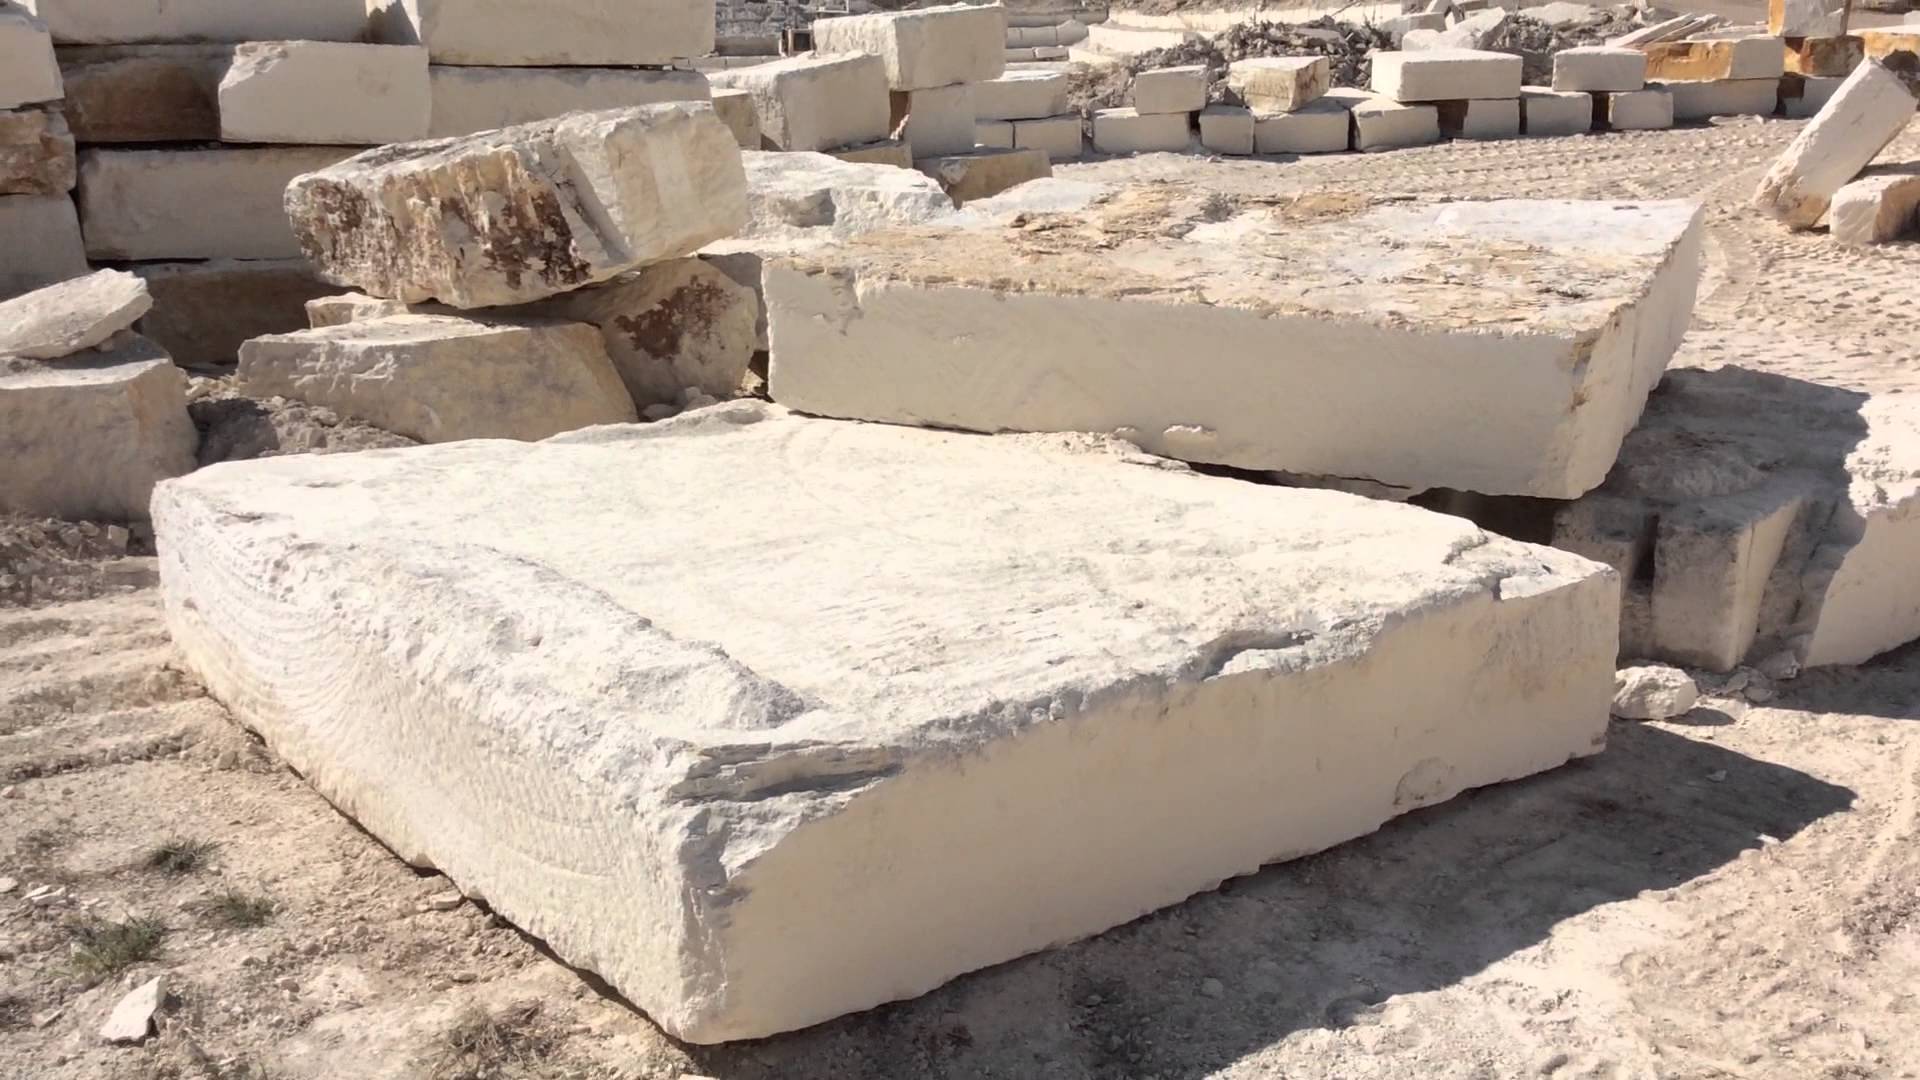 Aguado Stone, Limestone Blocks after removal from the ground - YouTube